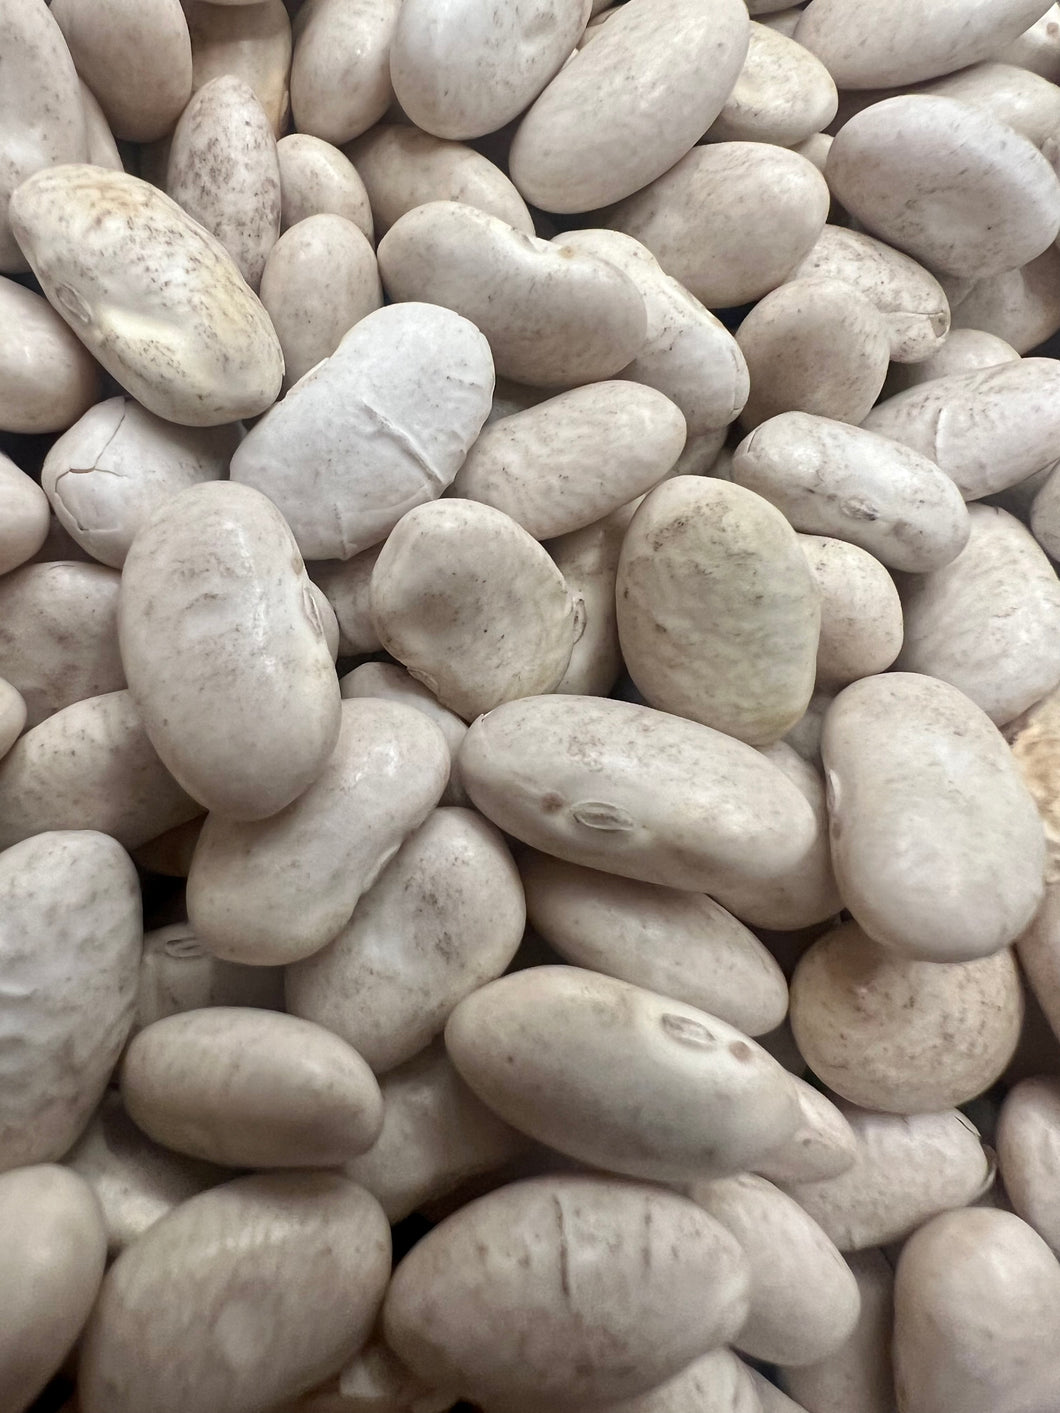 White Beans “Cannellini” Seeds Grow Your Own